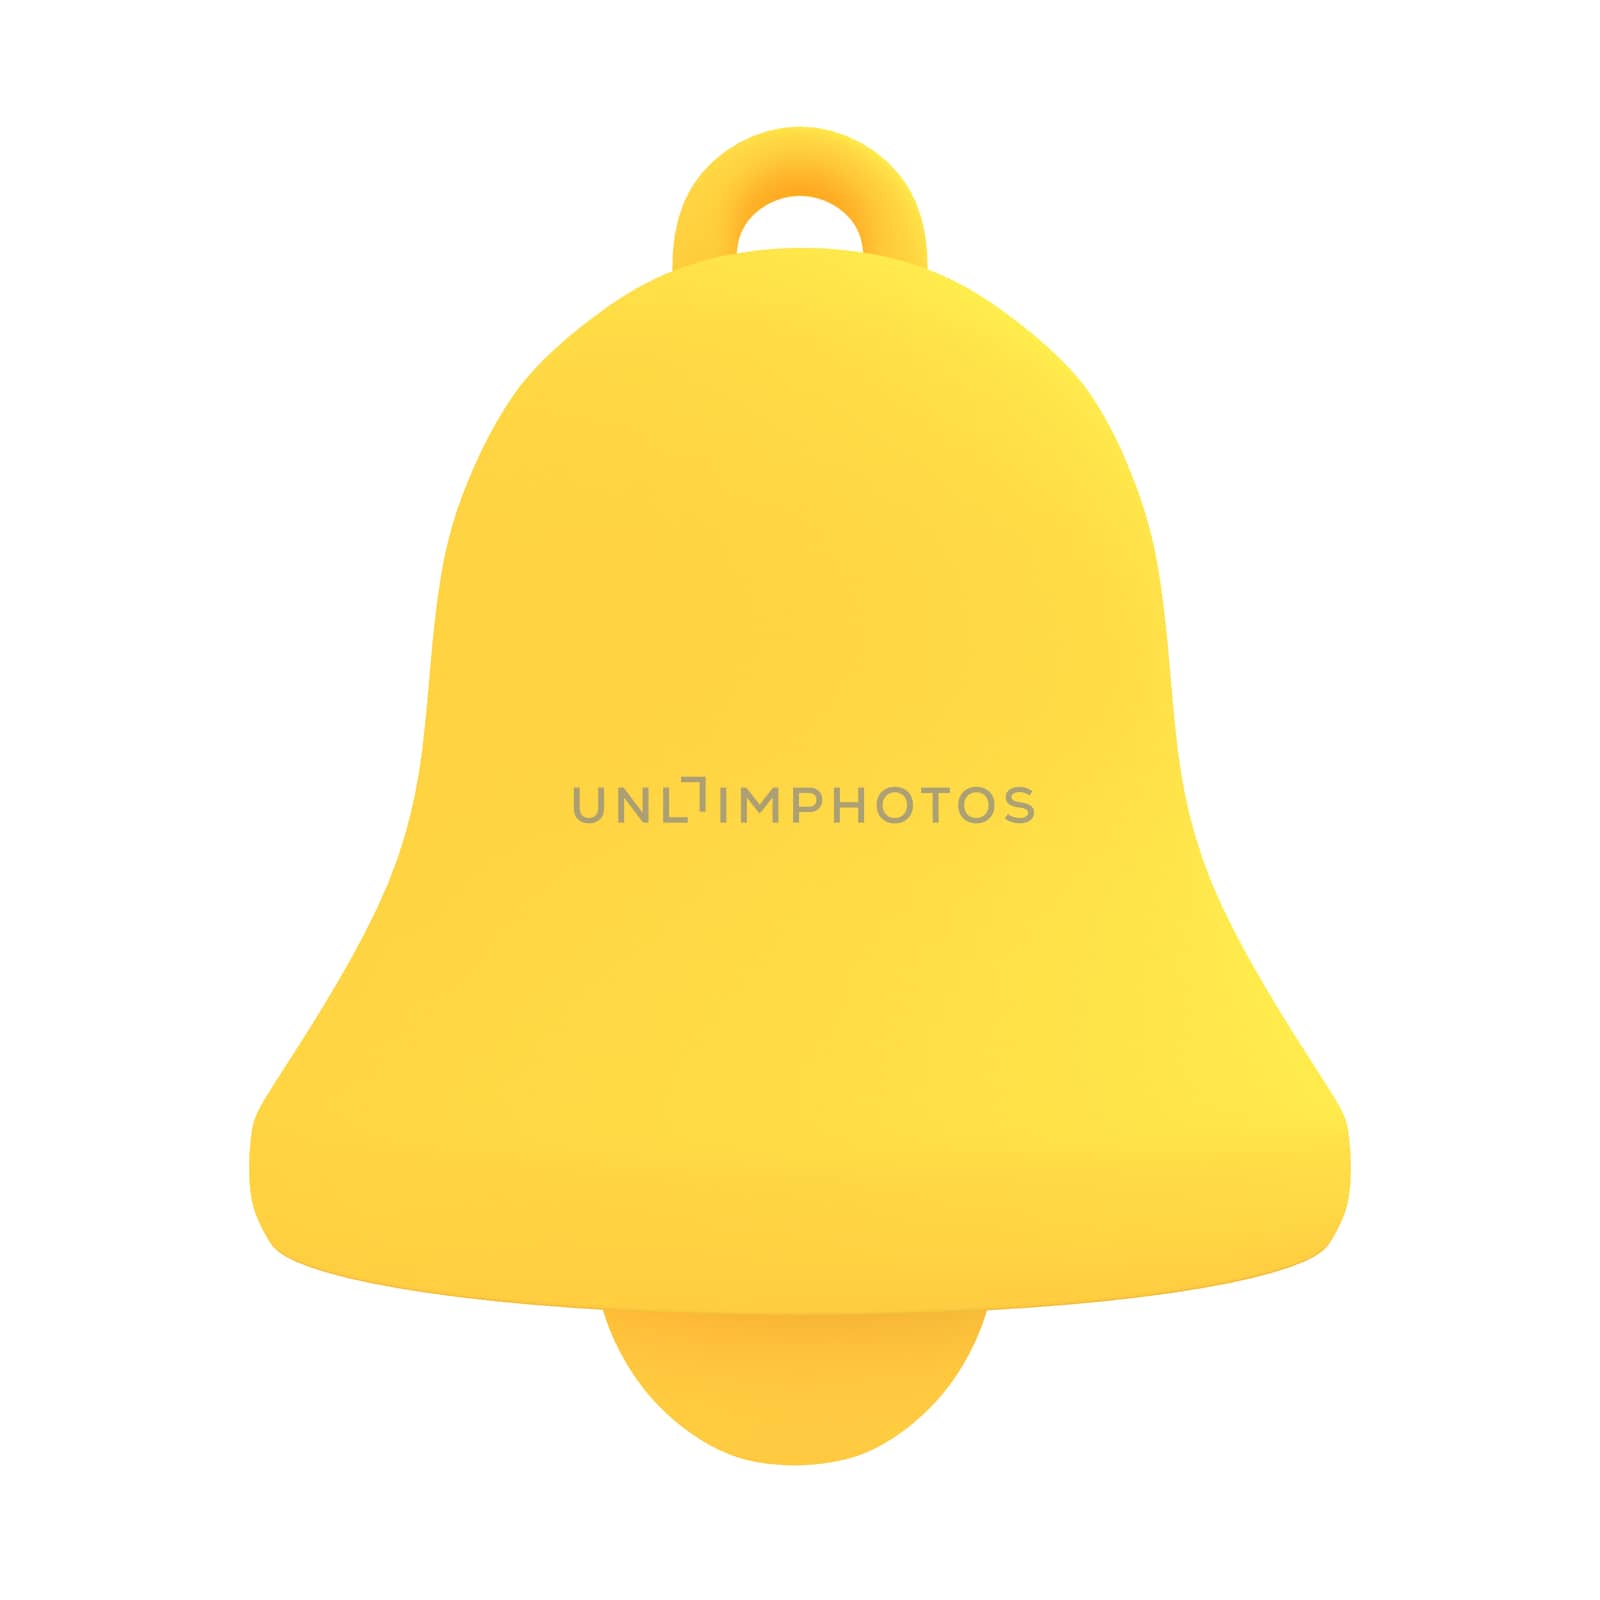 Render illustration of yellow bell over isolated on white by HD_premium_shots